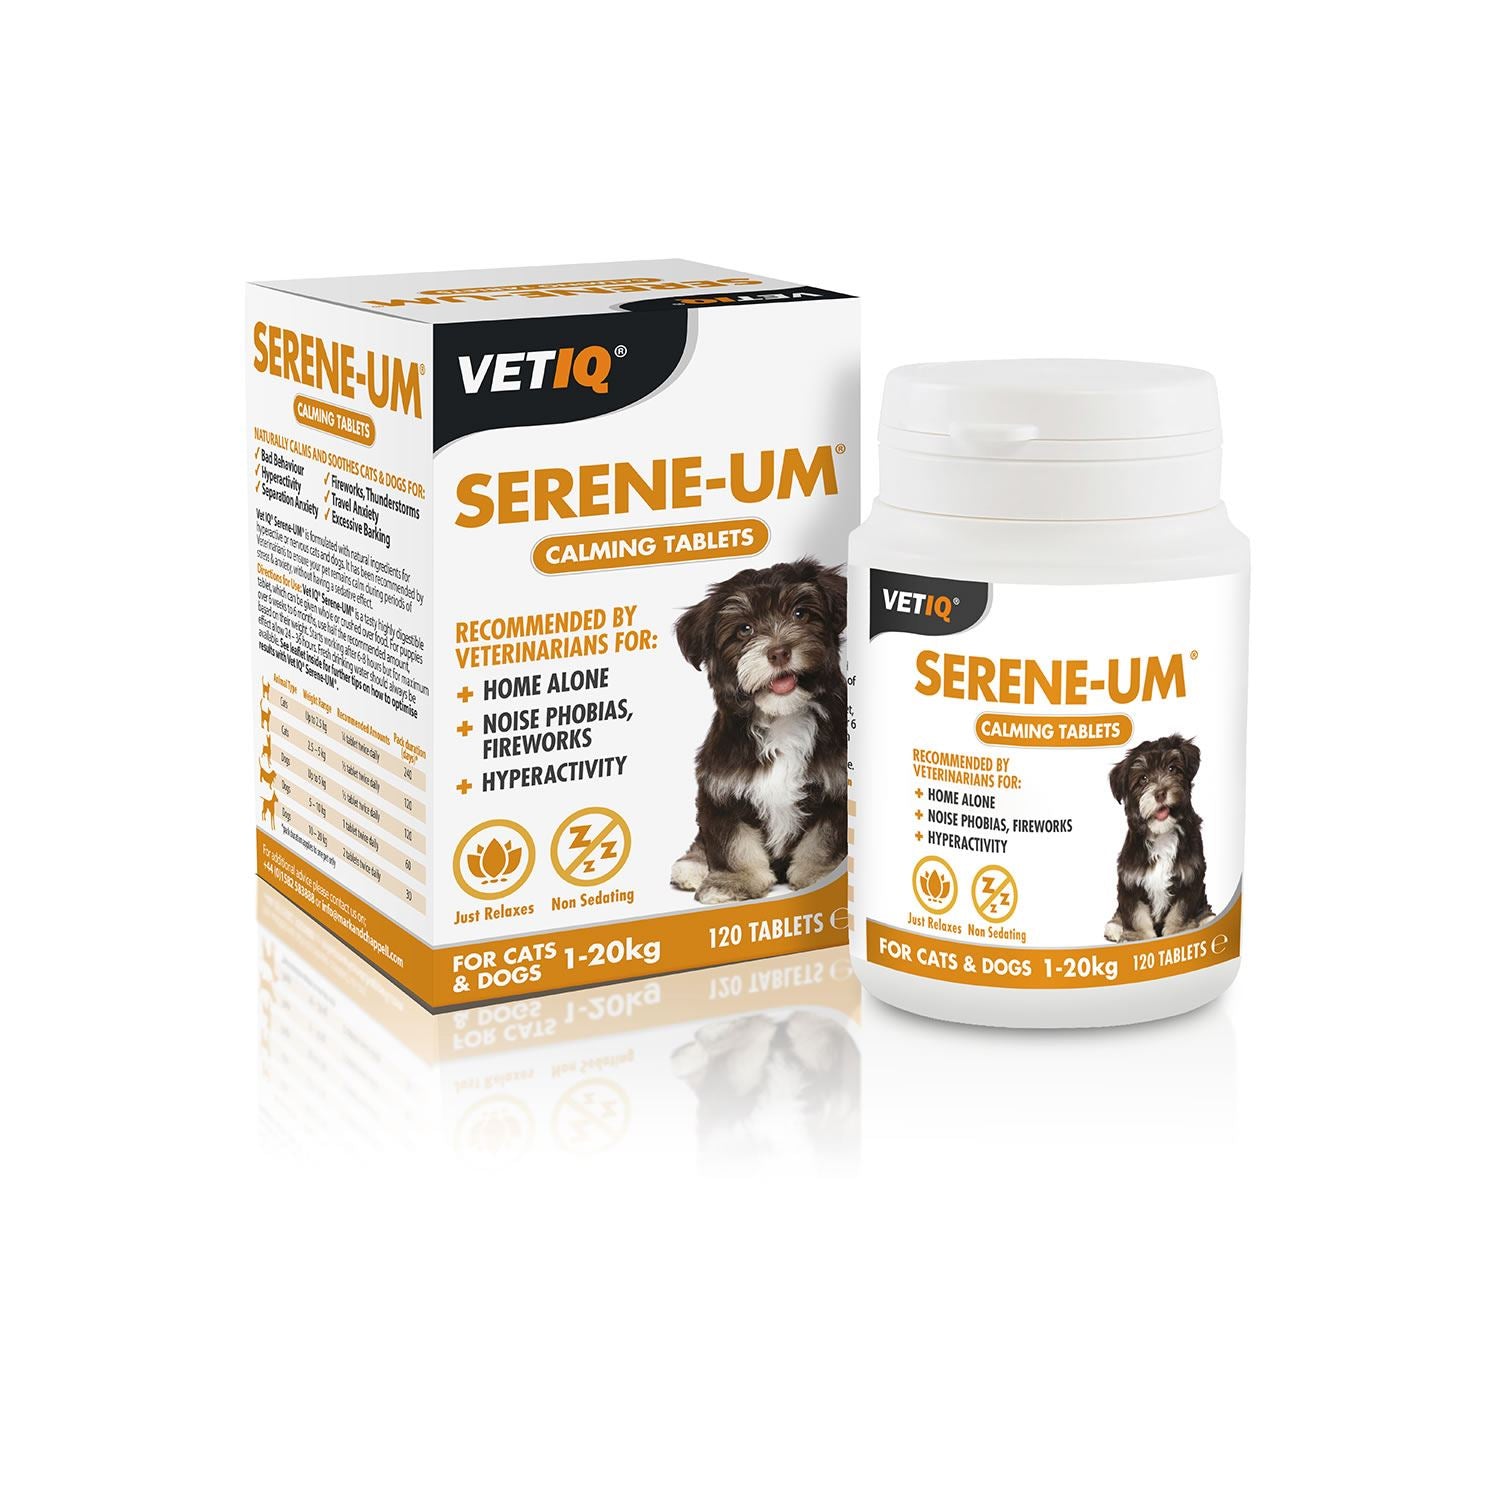 Vetiq Serene-Um Calming Tablets For Cats & Dogs 1-20Kg - Just Horse Riders